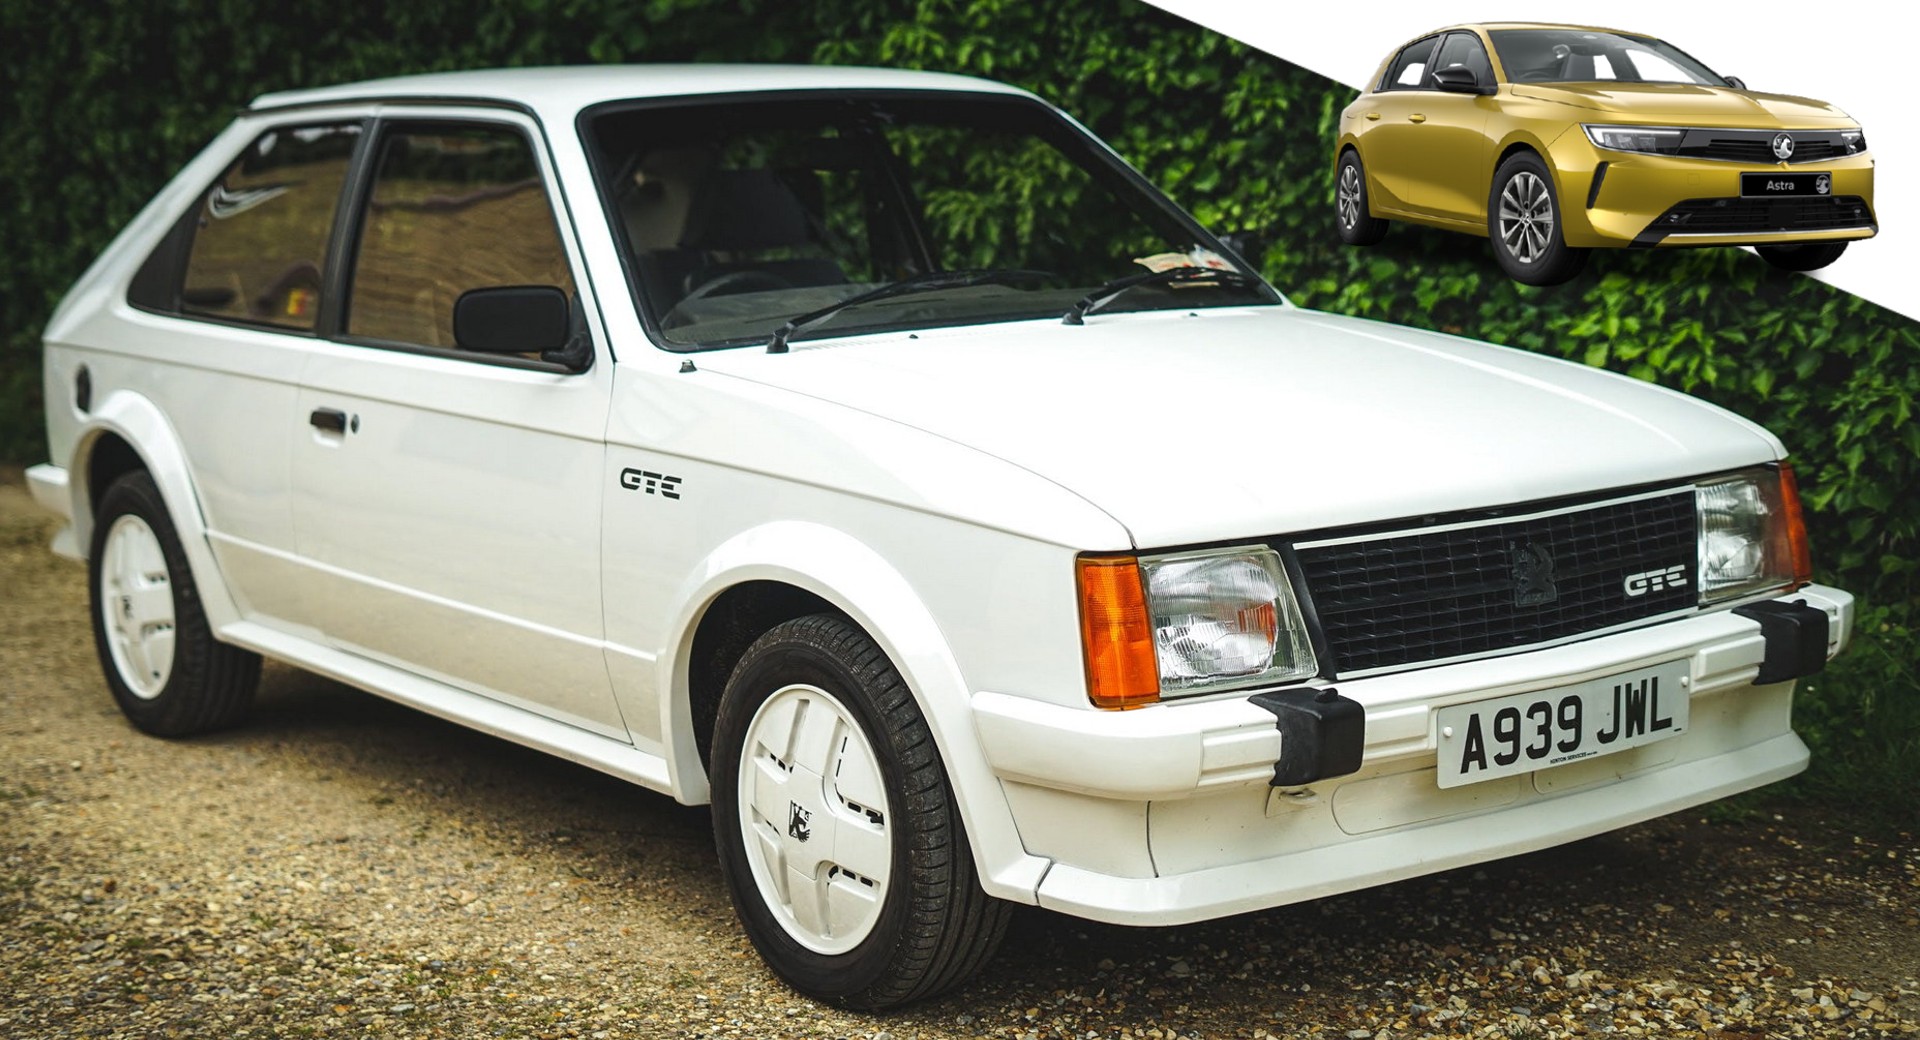 This 1982 Vauxhall Astra GTE Nearly Matched The Price Of The New 2022  Vauxhall Astra